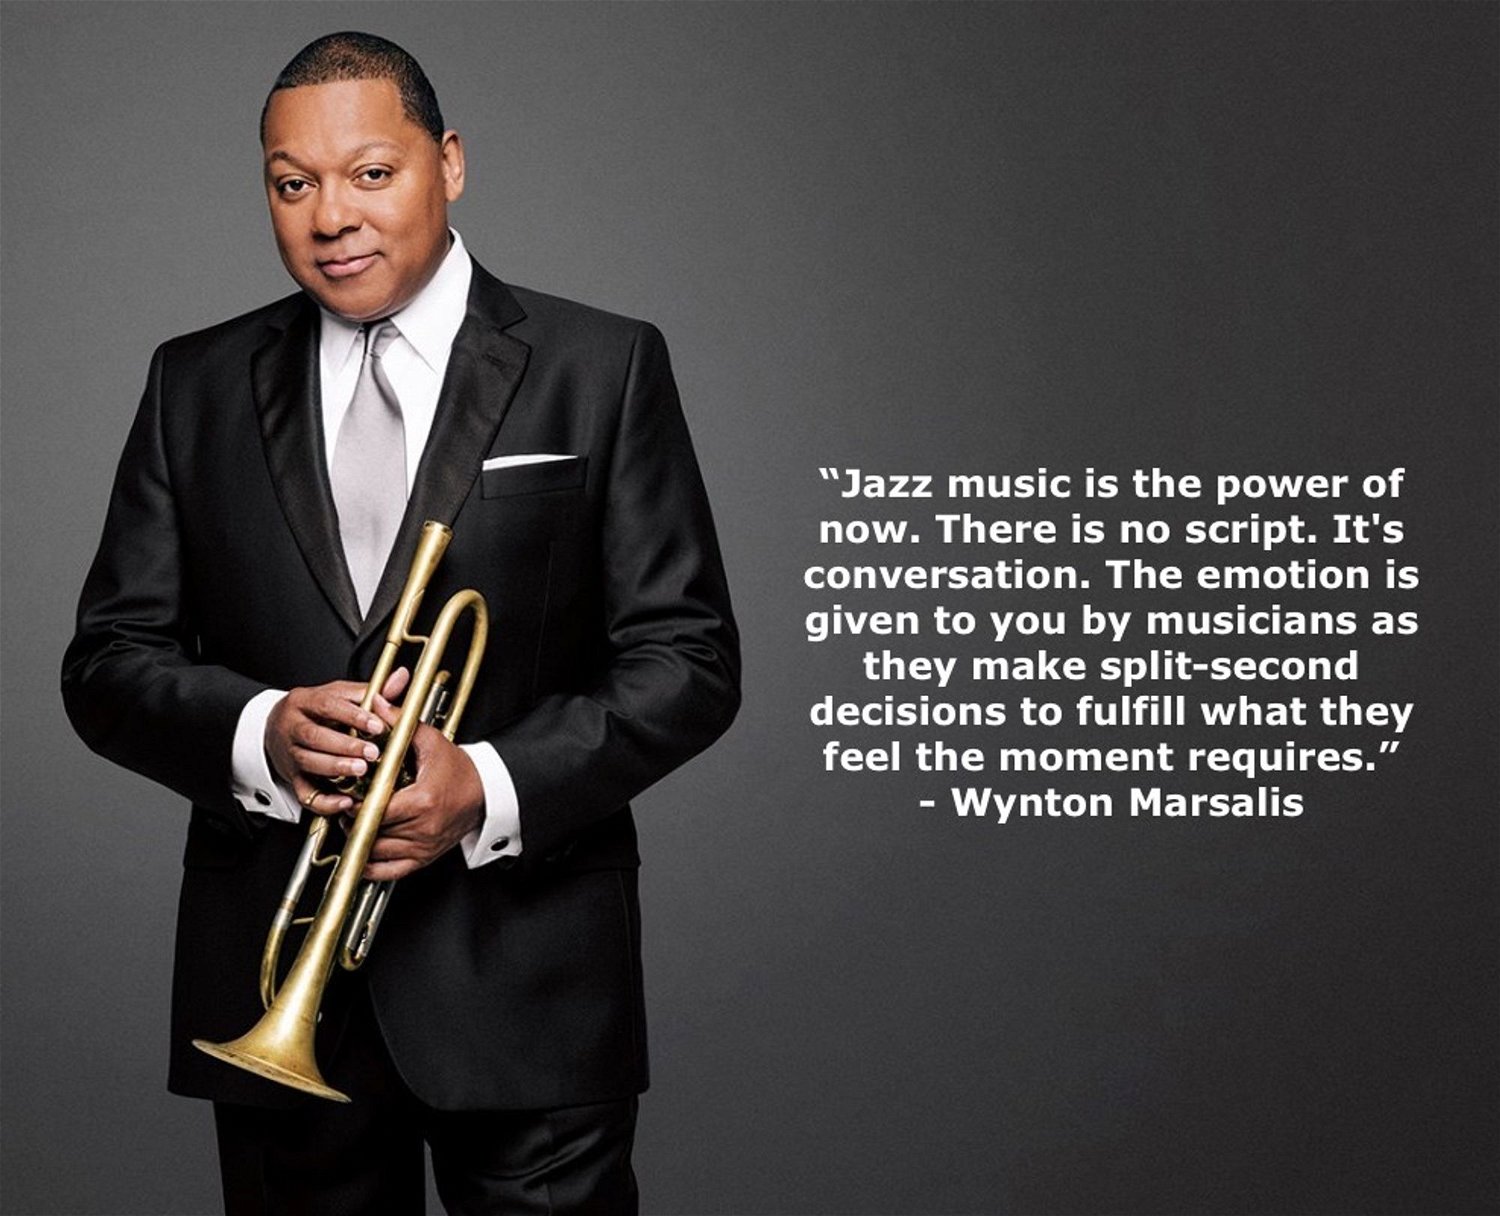 Photo: Joe Martinez for Jazz at Lincoln Center | Quote: https://www.azquotes.com/quote/527775